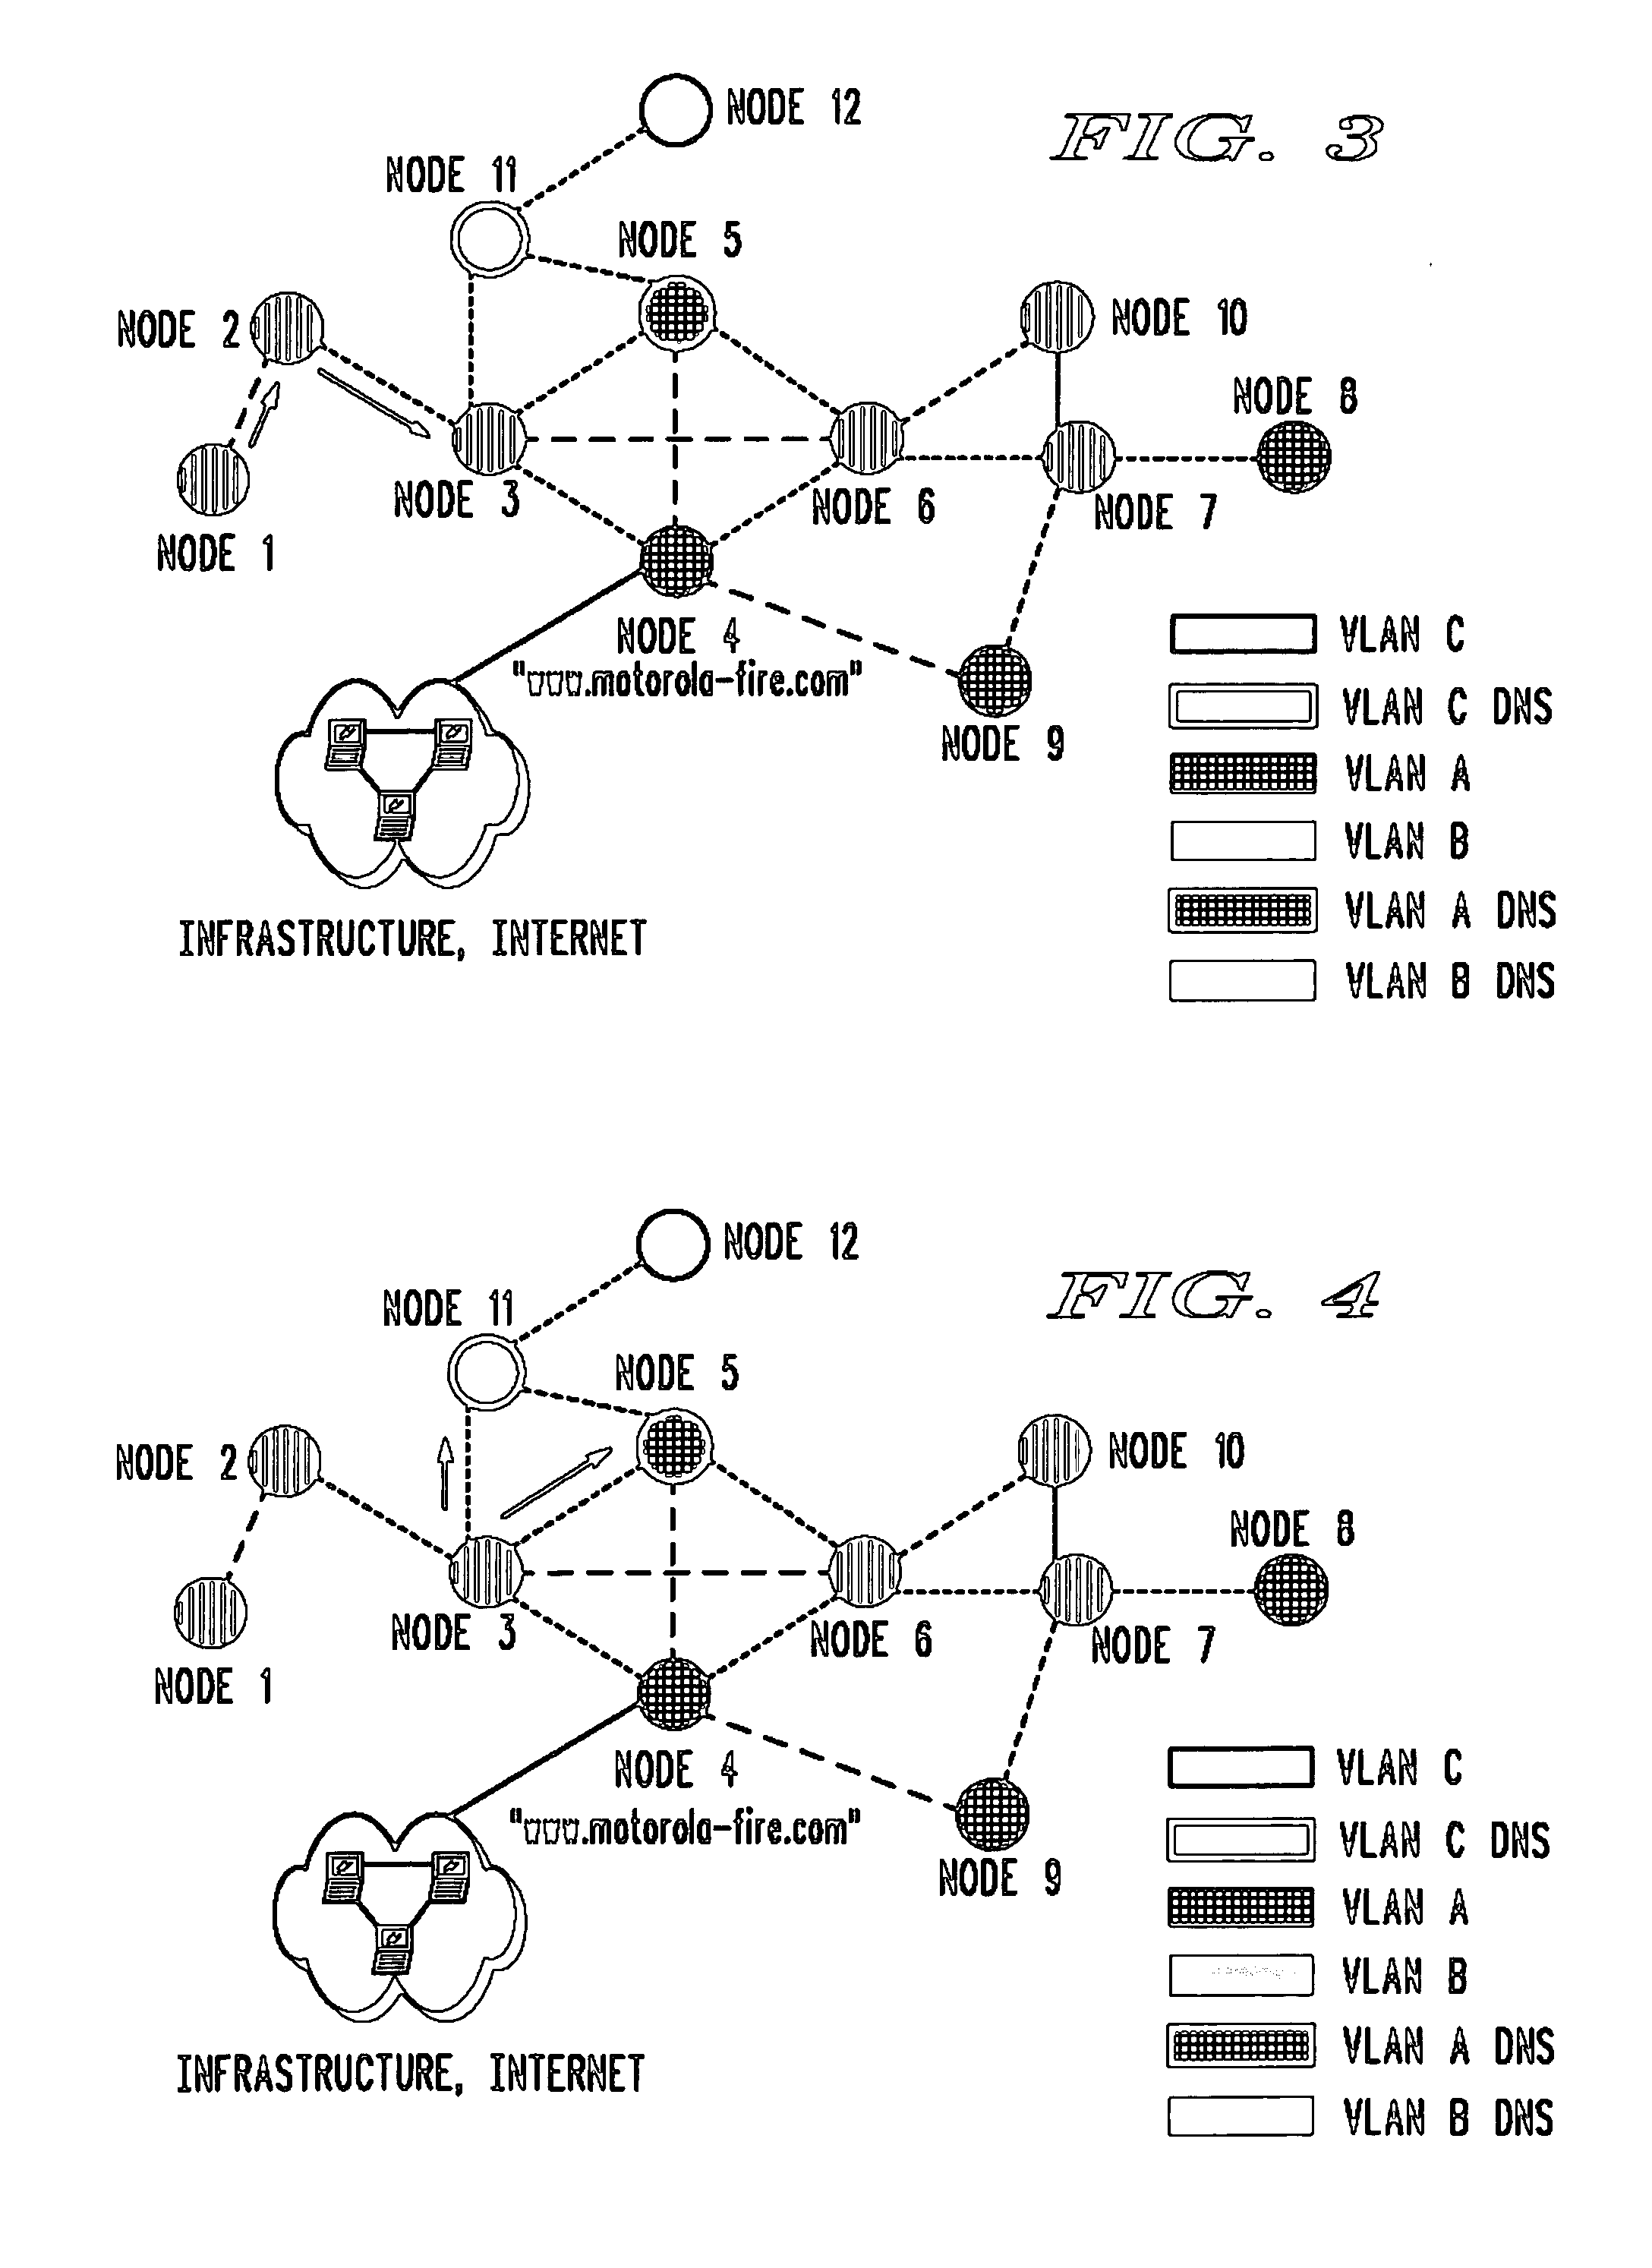 Method for domain name service (DNS) in a wireless ad hoc network